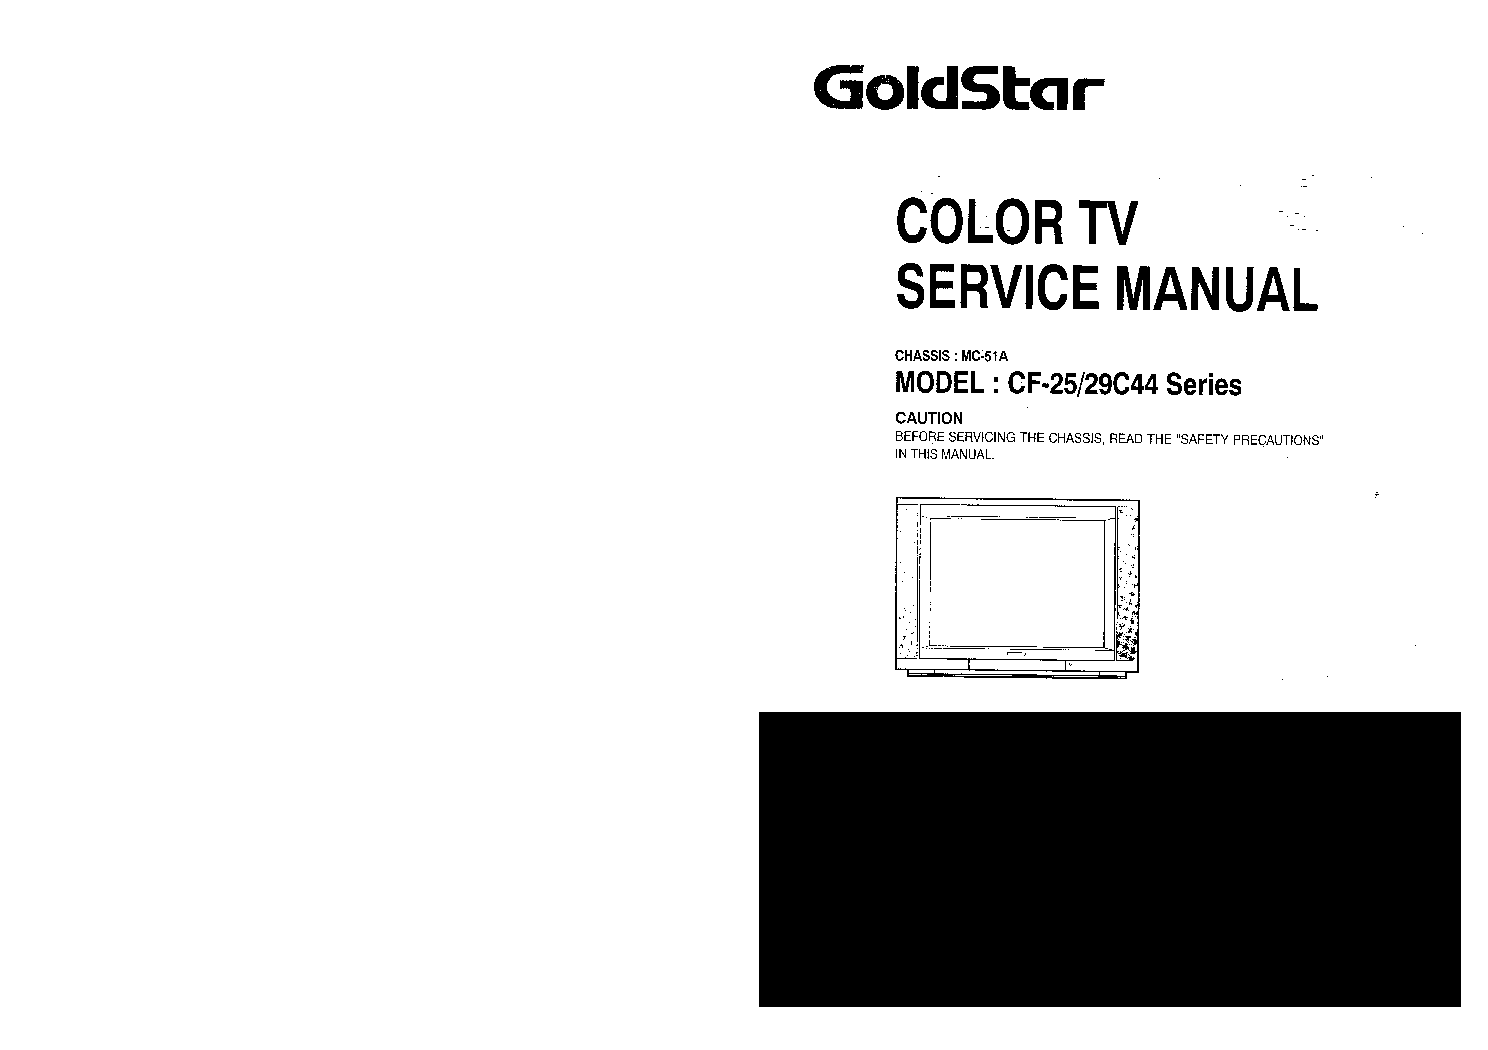 LG MC51A-CHASSIS-CF25C44-SM service manual (1st page)